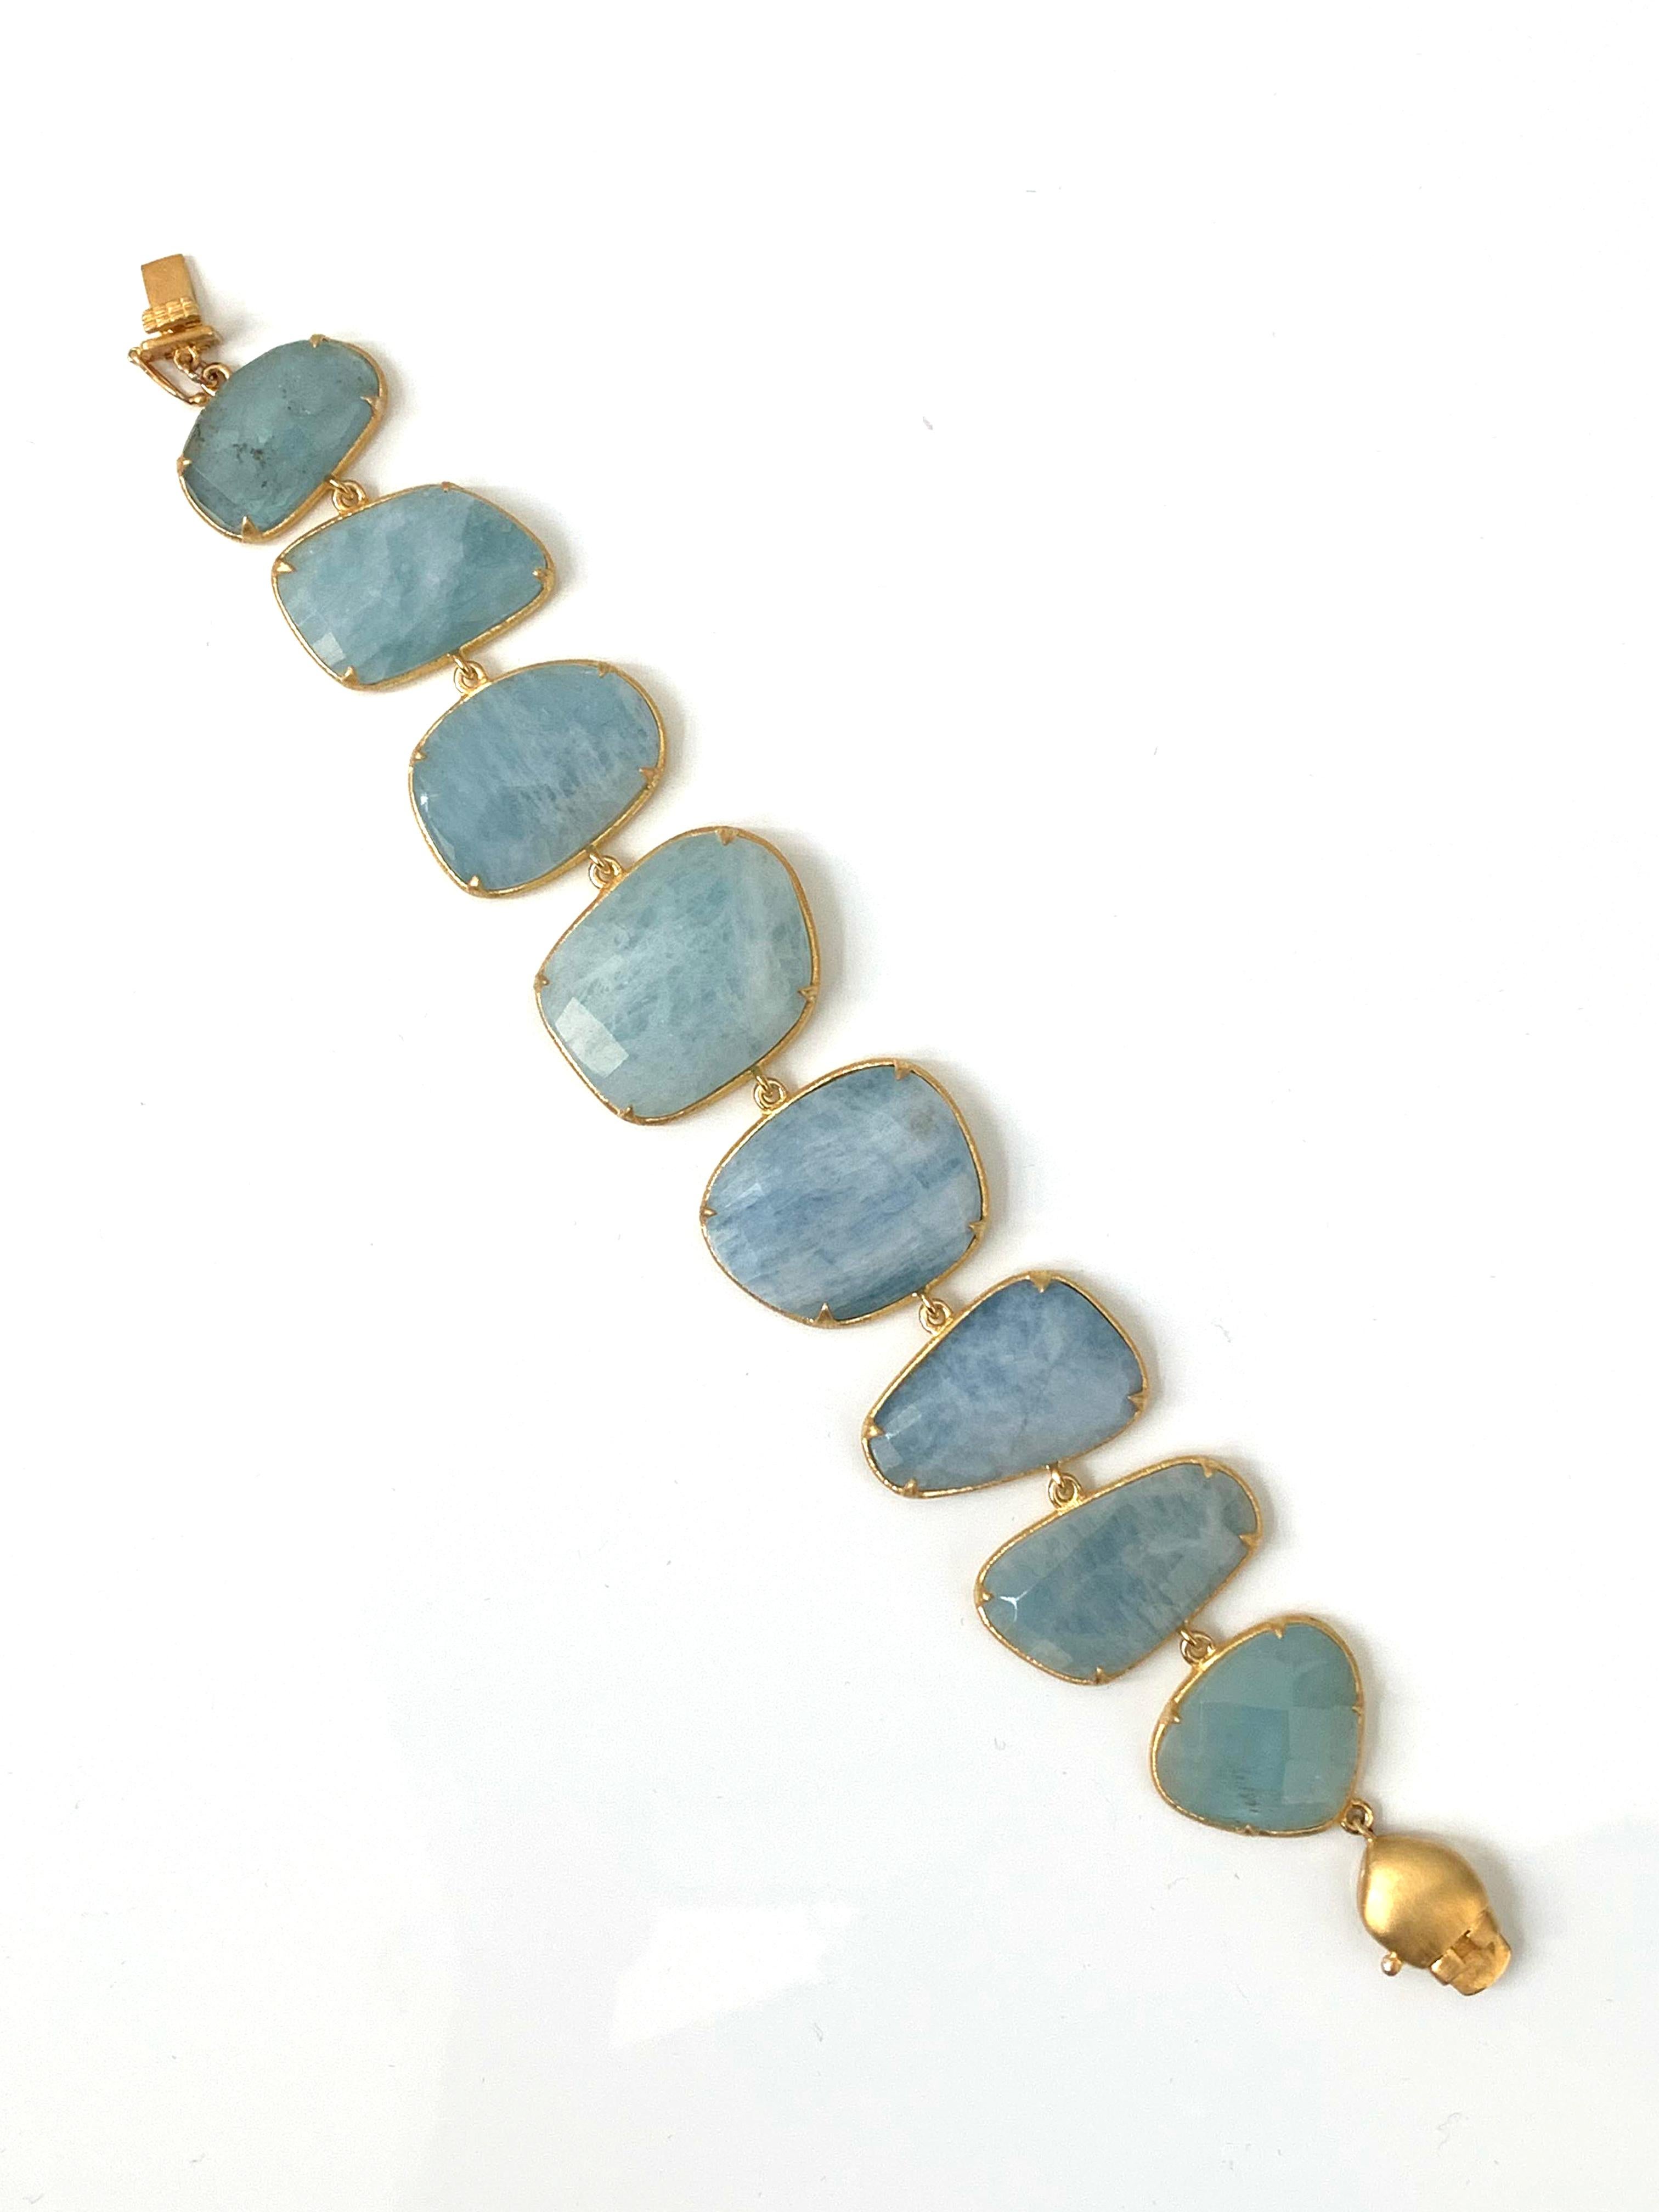 Beautiful Aquamarine Link Bracelet. 

The bracelet features 8 unique fancy-shape milky aquamarines with highly skill artisan work. The aquamarines are individually hand set in its own bezel setting (bench work) with streaking etching technique on